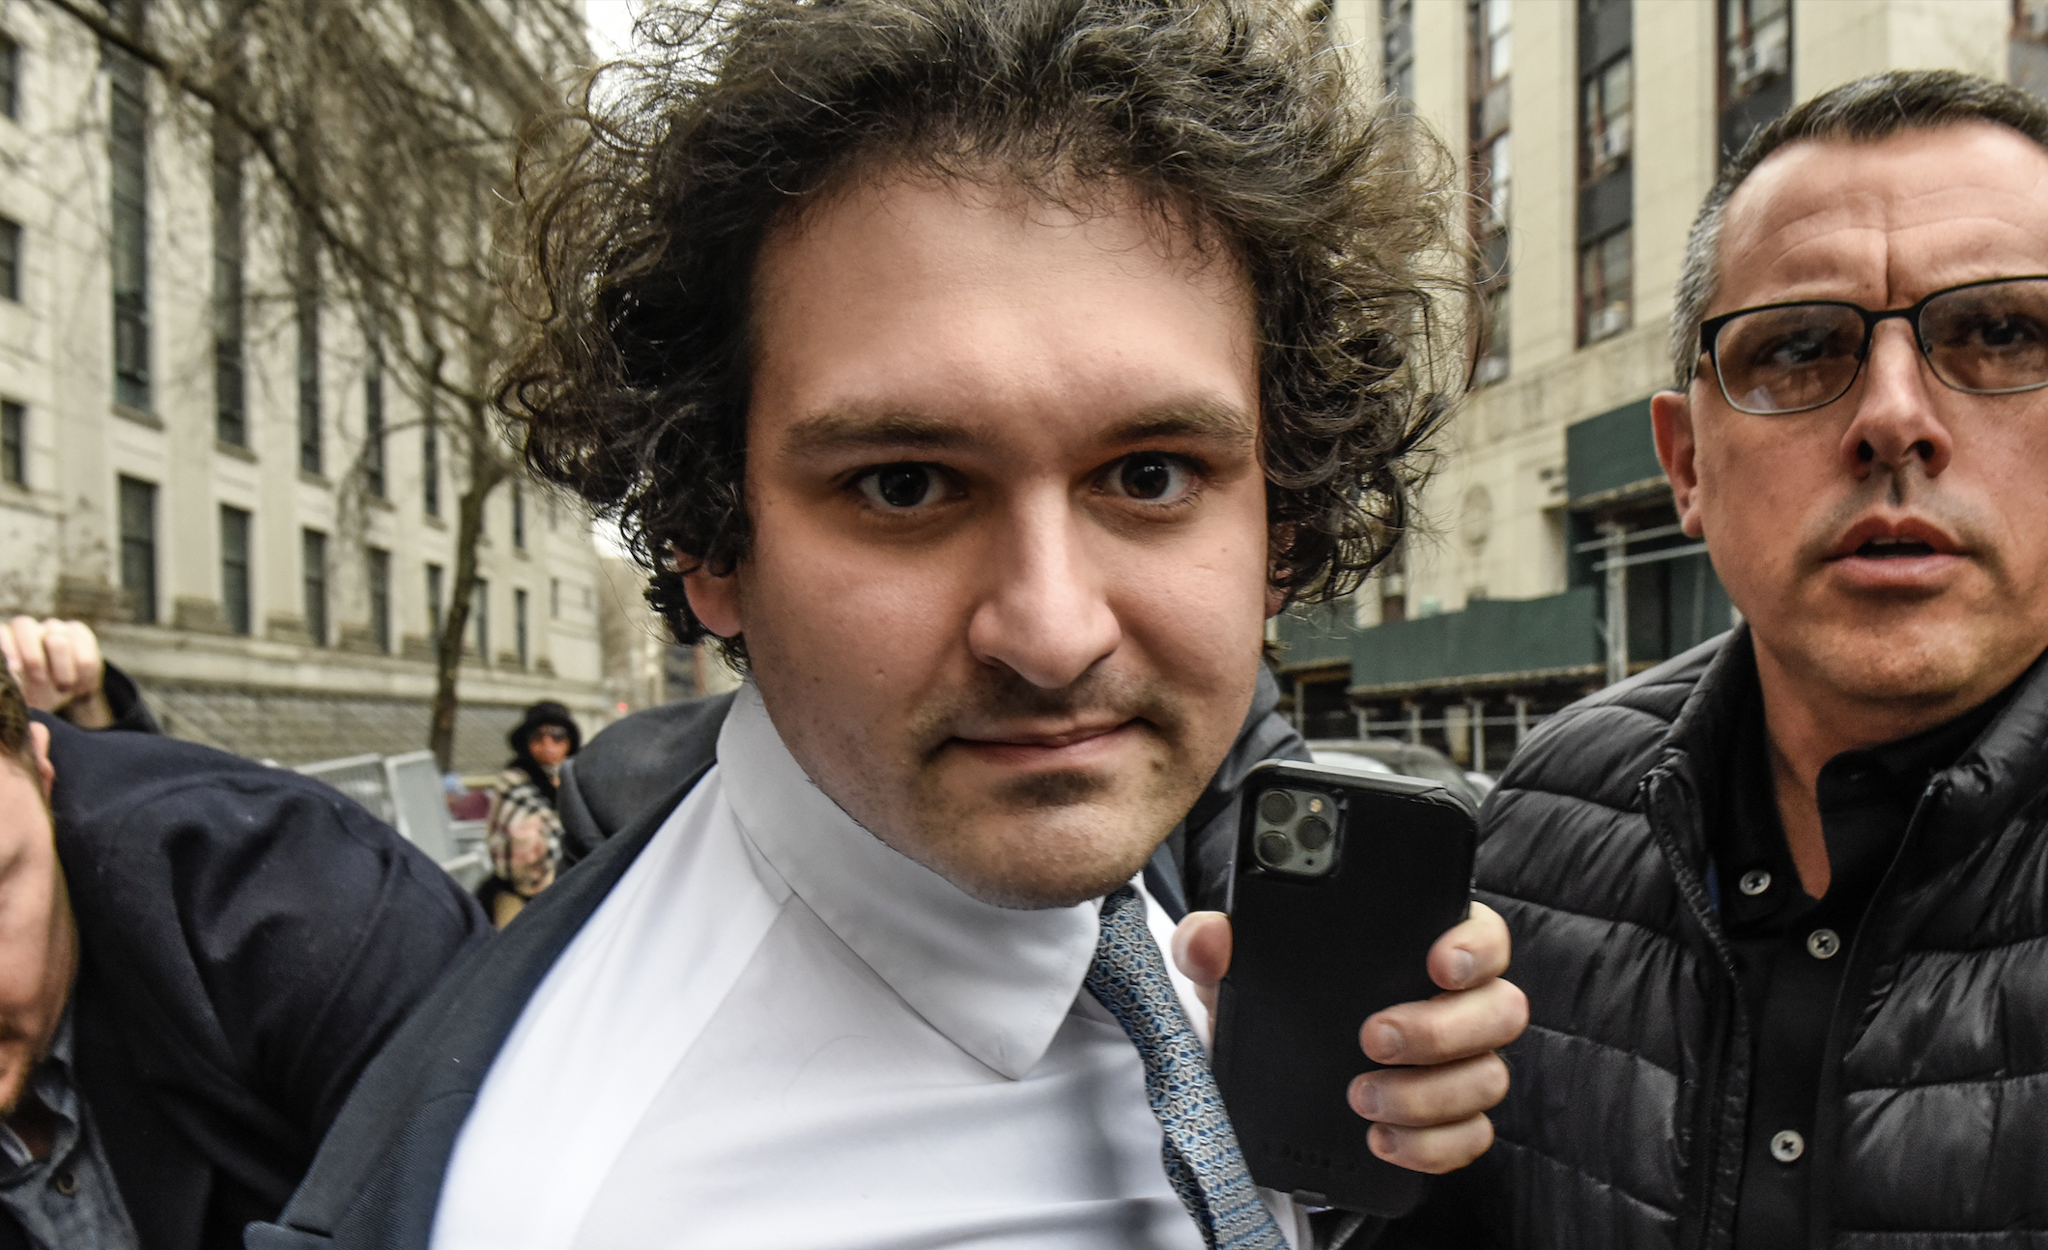 Sam Bankman-Fried, co-founder of FTX Cryptocurrency Derivatives Exchange, departs from court in New York, US, on Thursday, Feb. 16, 2023. US prosecutors said their discovery that Sam Bankman-Fried used a virtual private network to access the internet on two recent occasions raises concerns that the FTX co-founder could be hiding his online activities.